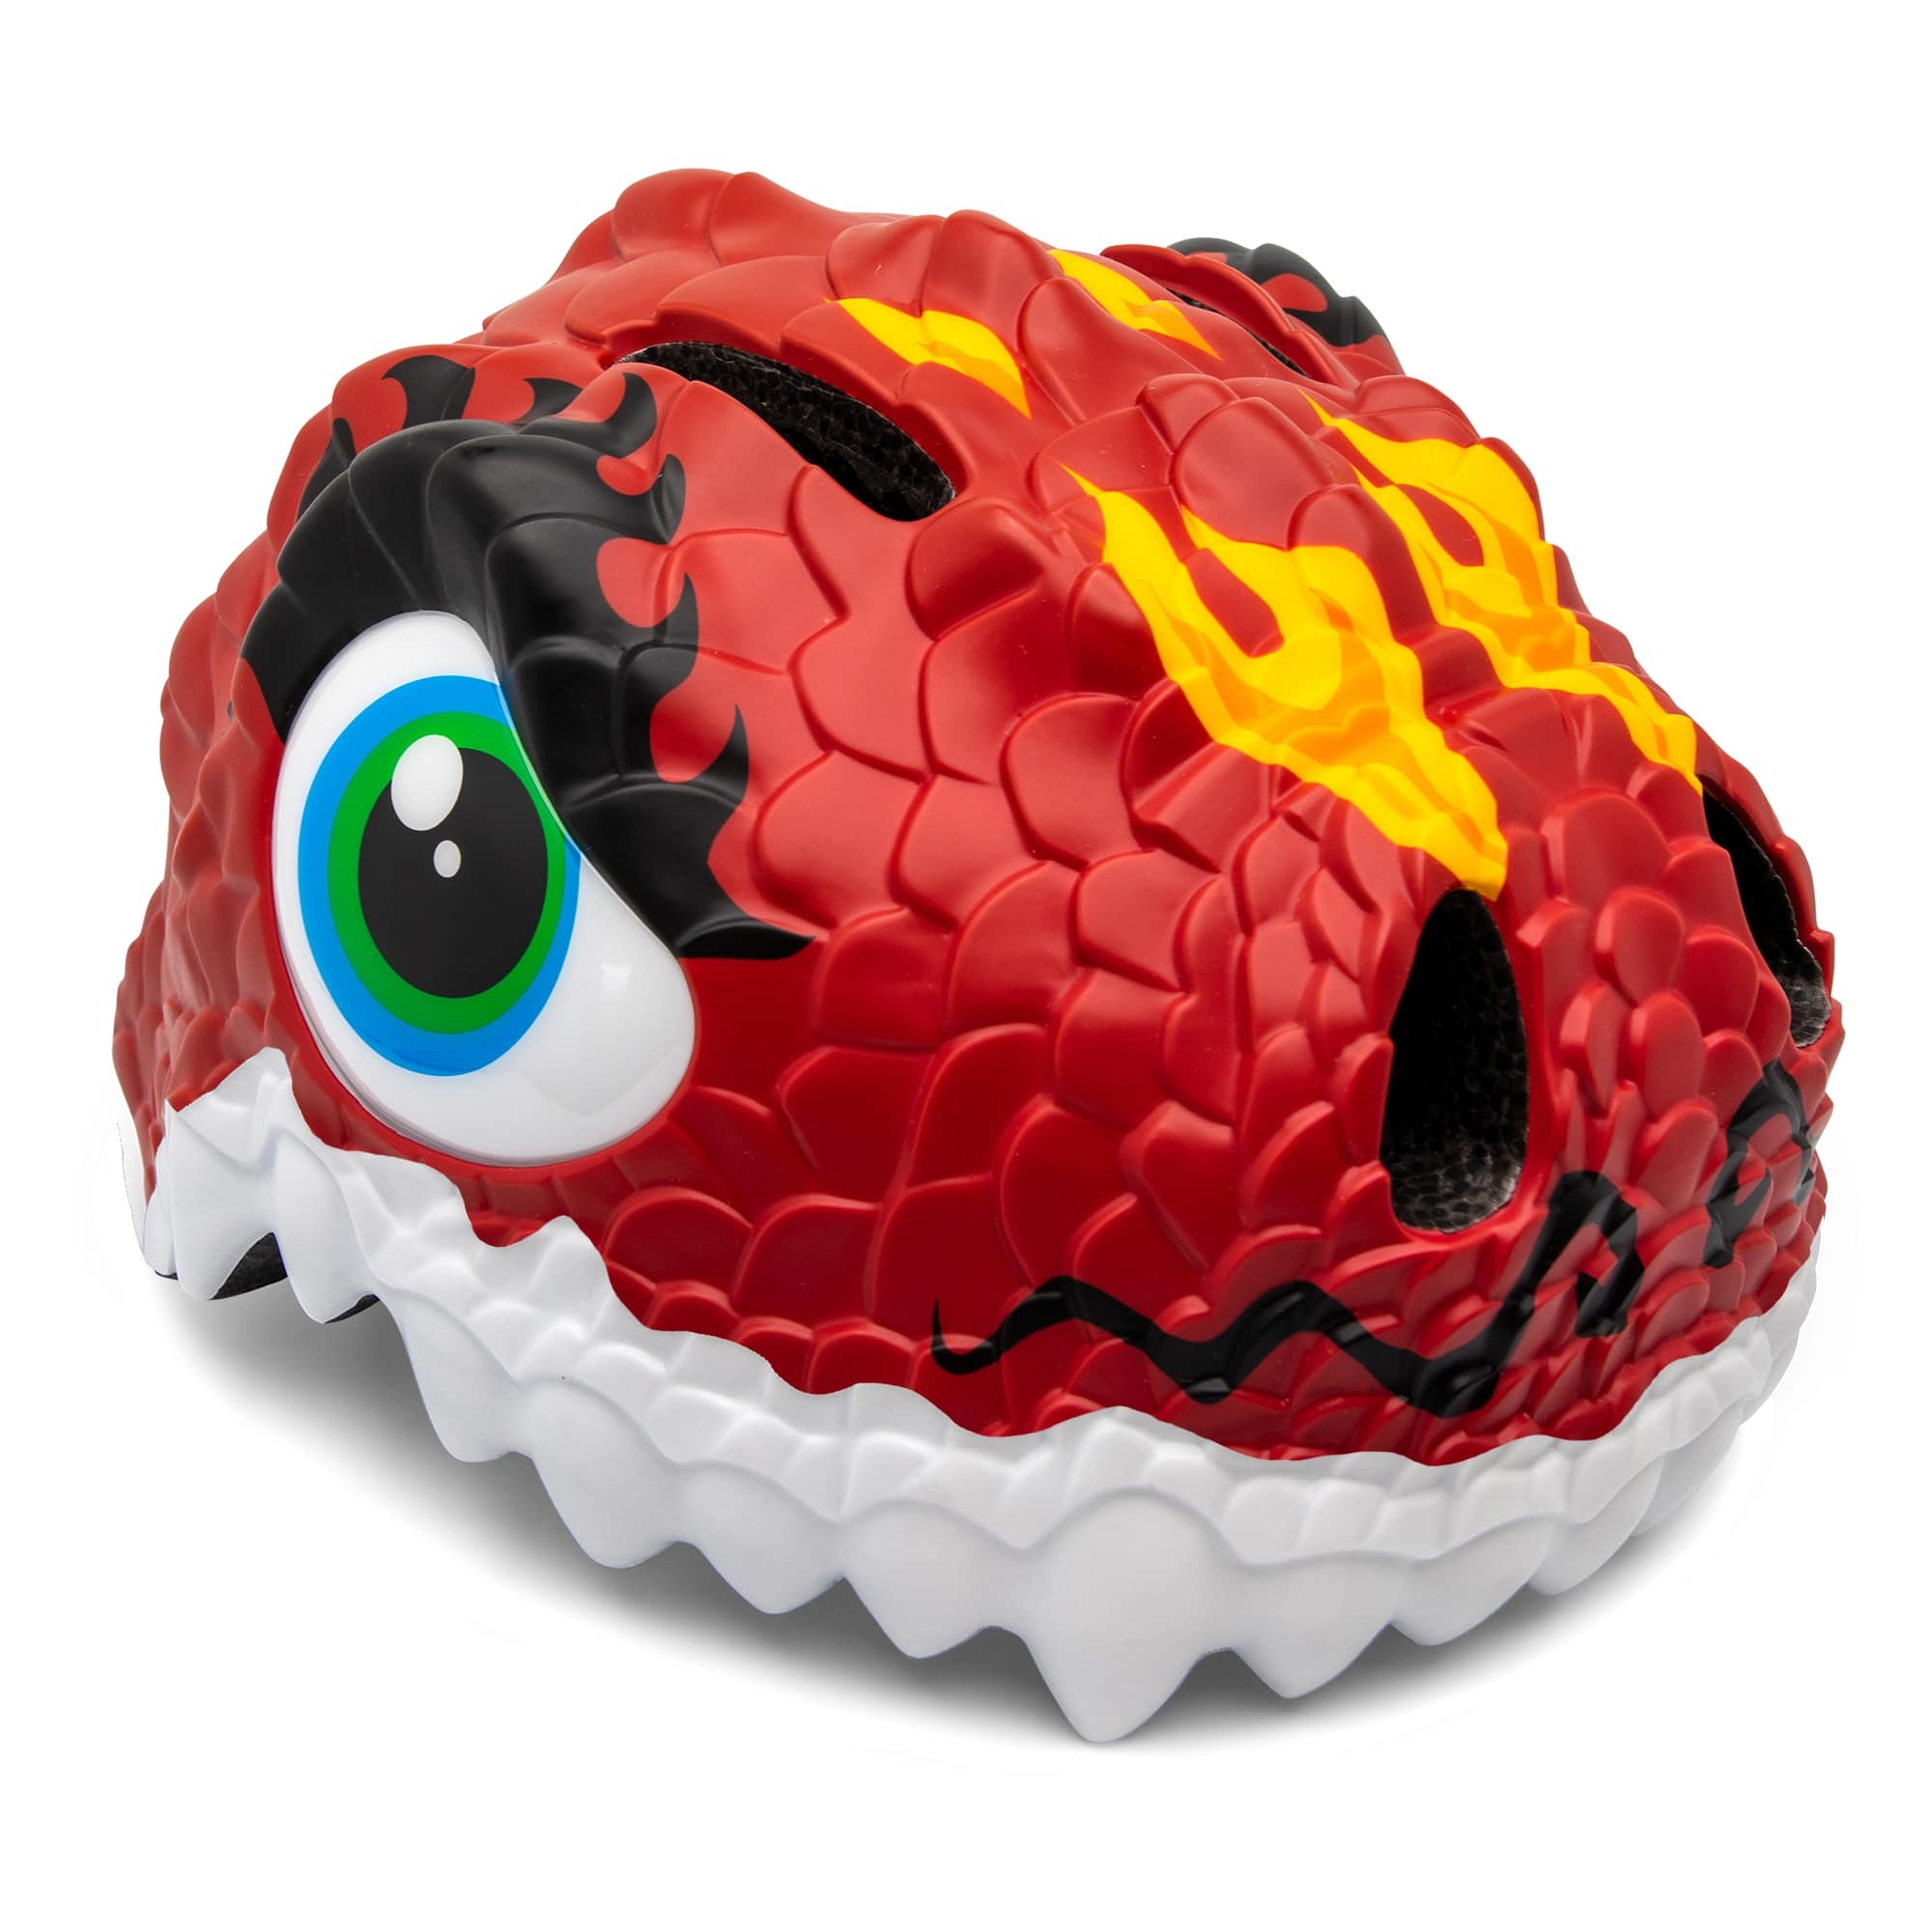 Crazy Safety - Dragon Bicycle Helmet - Red (100201-03-01) - Leker